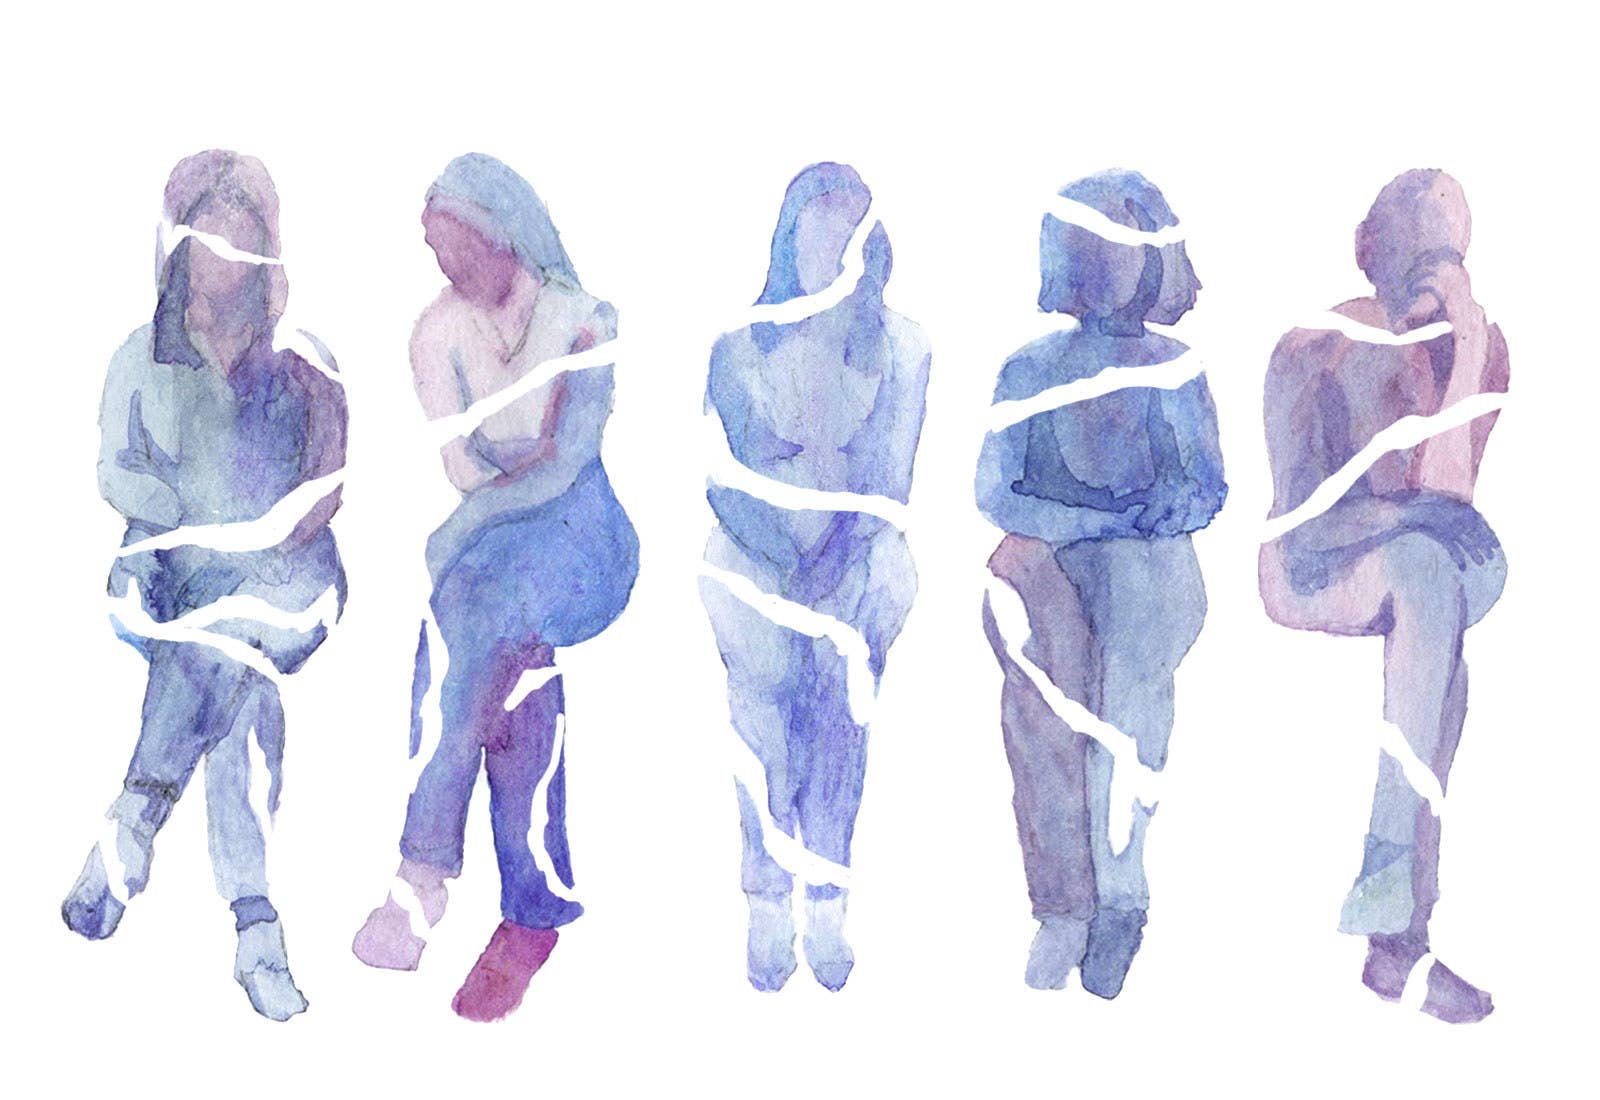 An illustration of five anonymized women